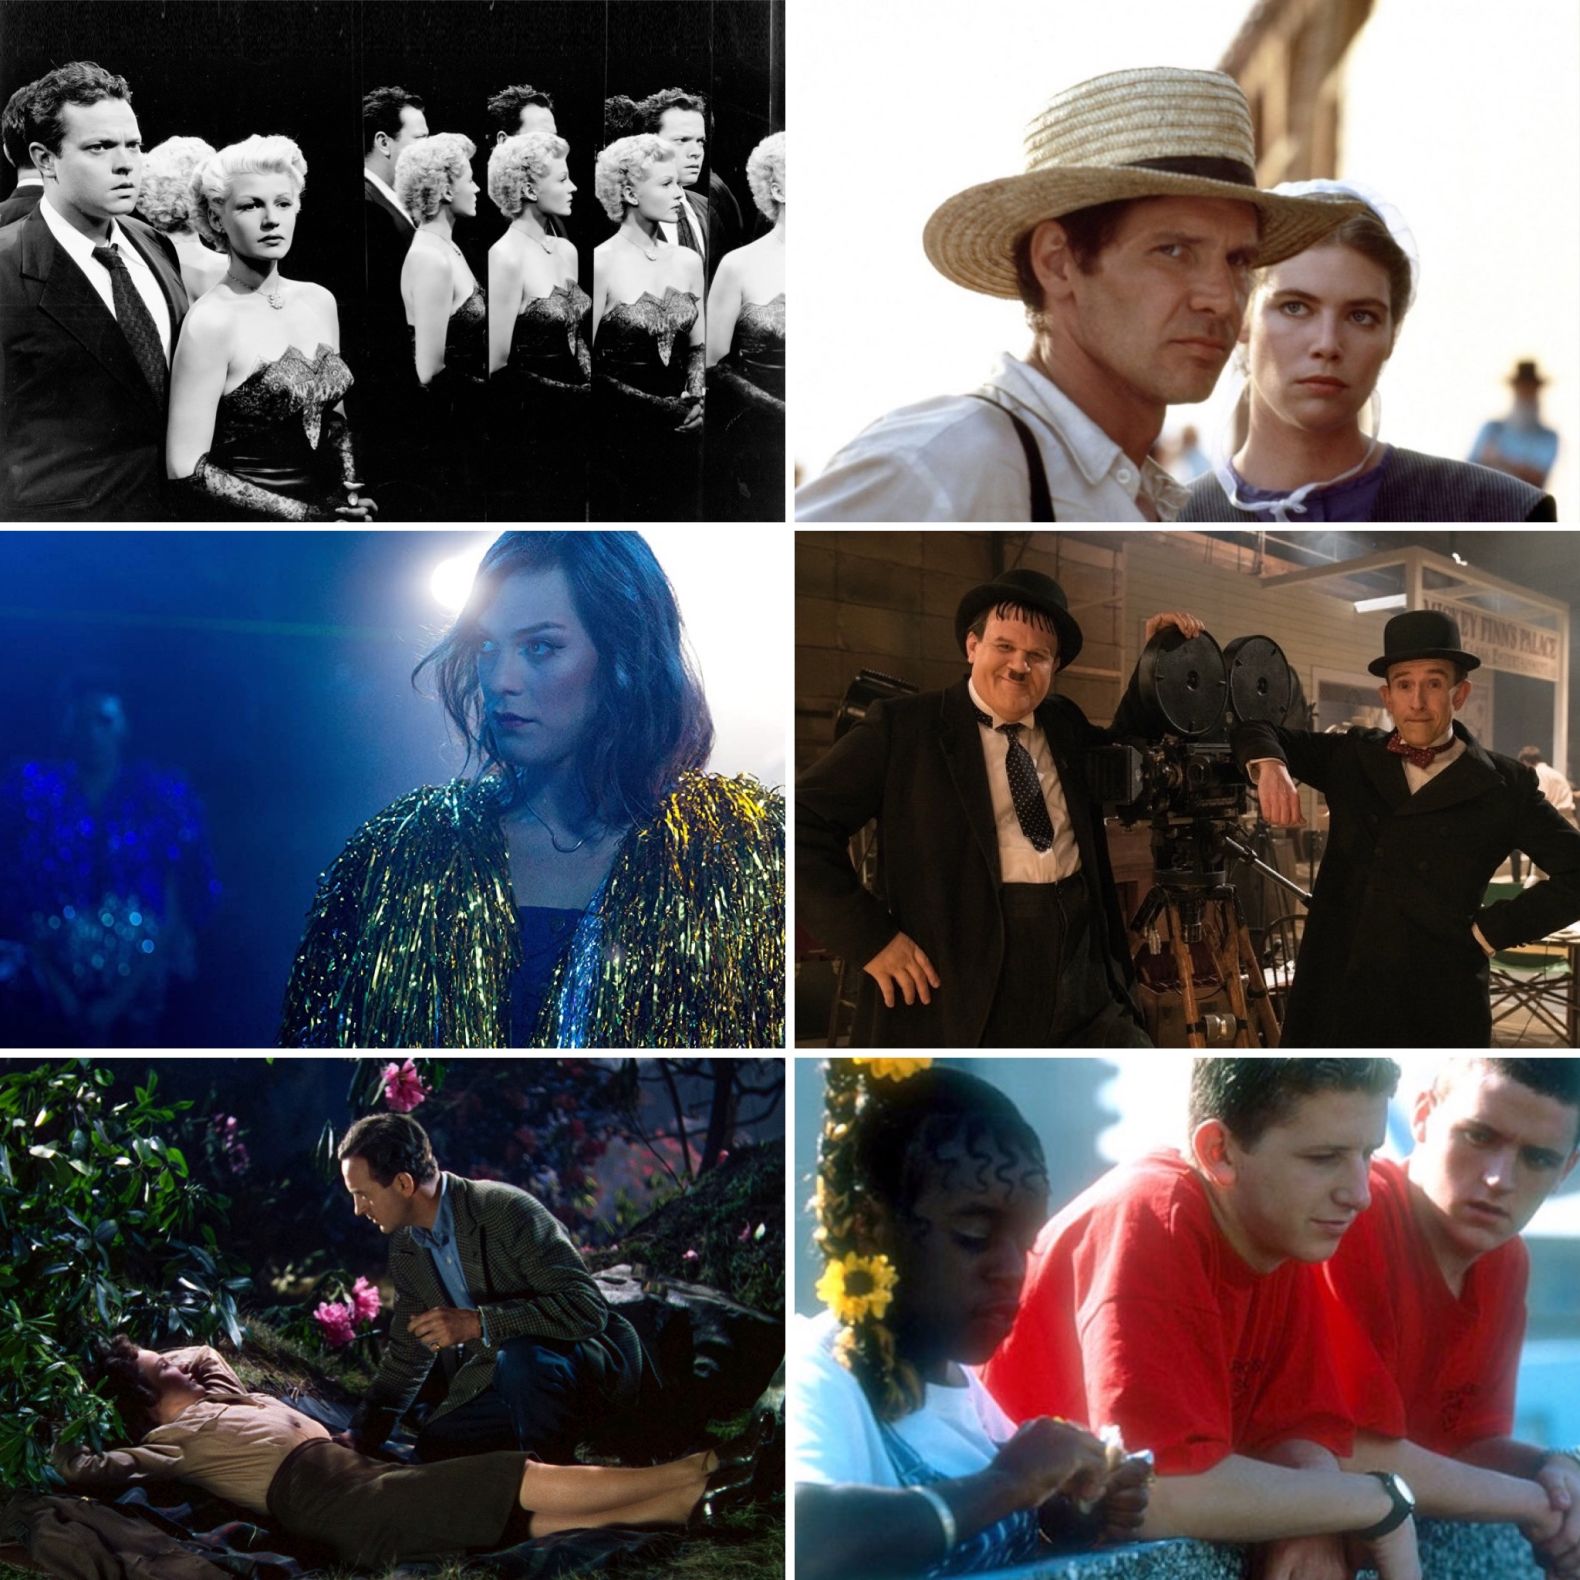 Duke Box #48: Our Guide to the Best Films on TV